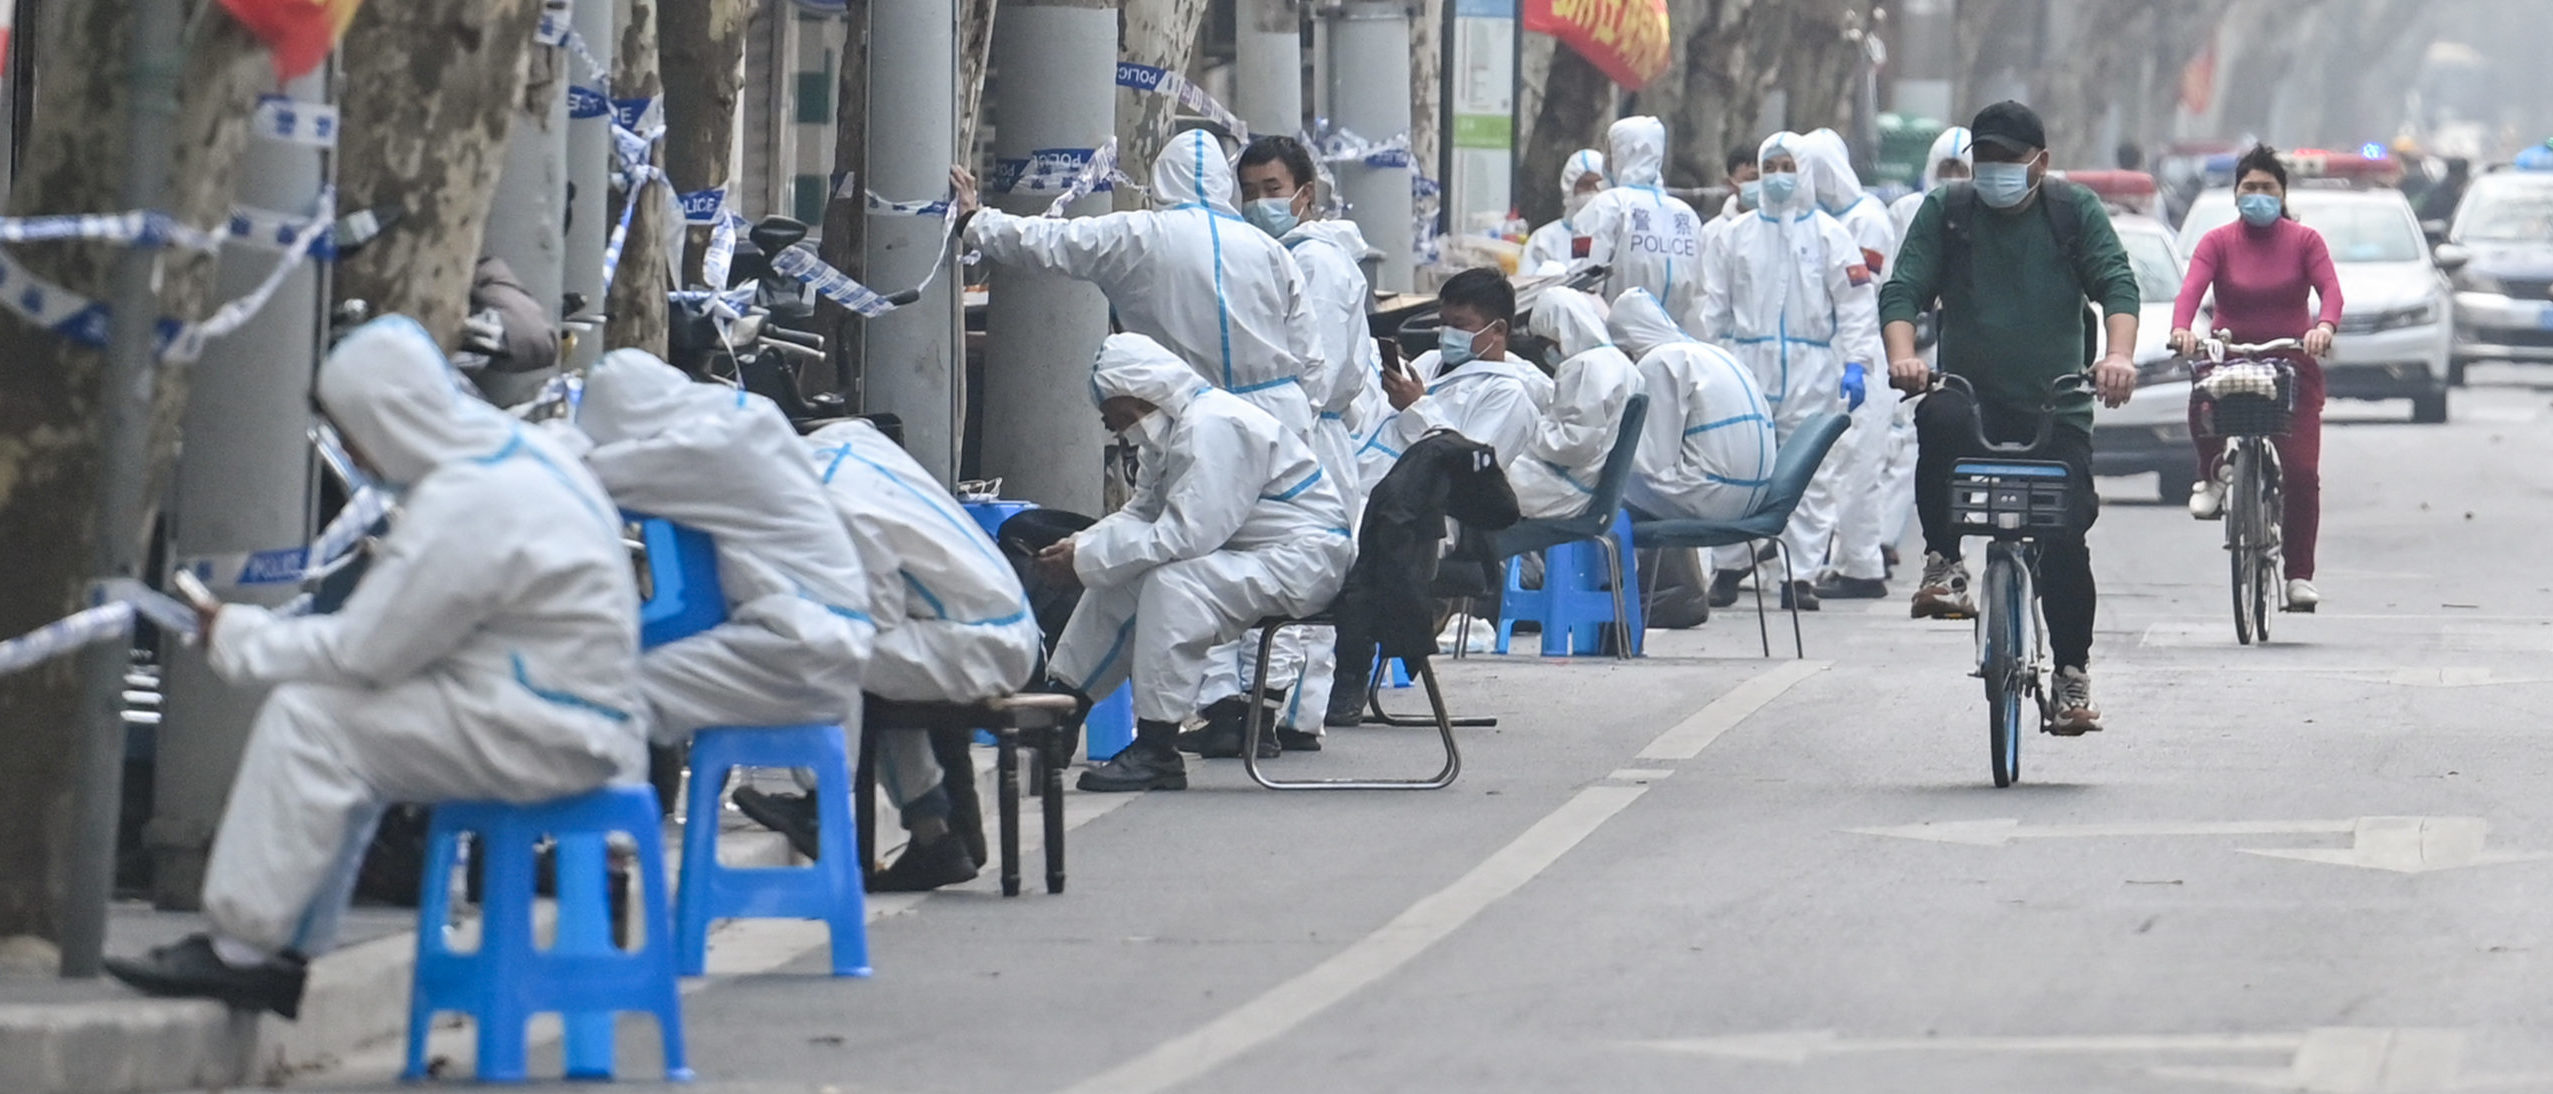 TOPSHOT - Workers are seen wearing protective clothes next to some lockdown areas after the detection of new cases of covid-19 in Shanghai on March 14, 2022 (Photo by Hector RETAMAL / AFP) (Photo by HECTOR RETAMAL/AFP via Getty Images)